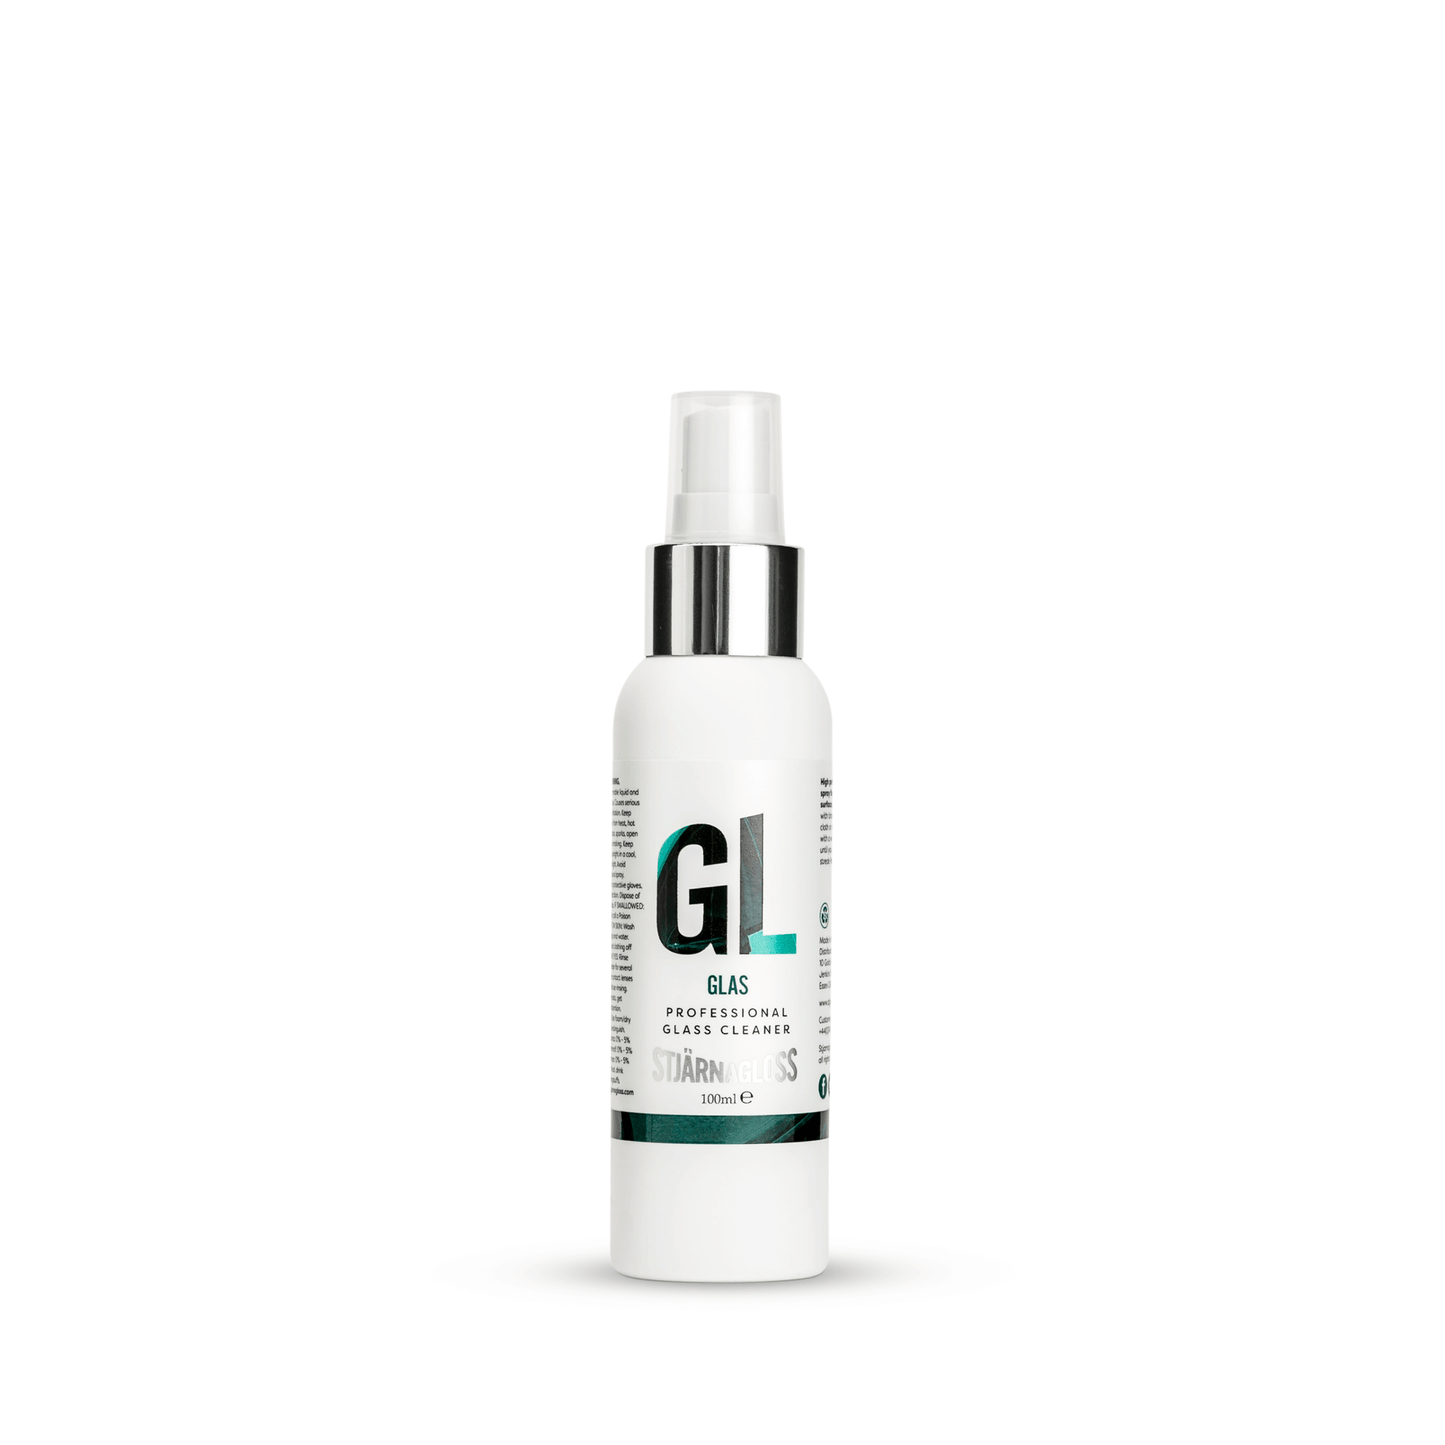 GLAS - PROFESSIONAL GLASS CLEANER